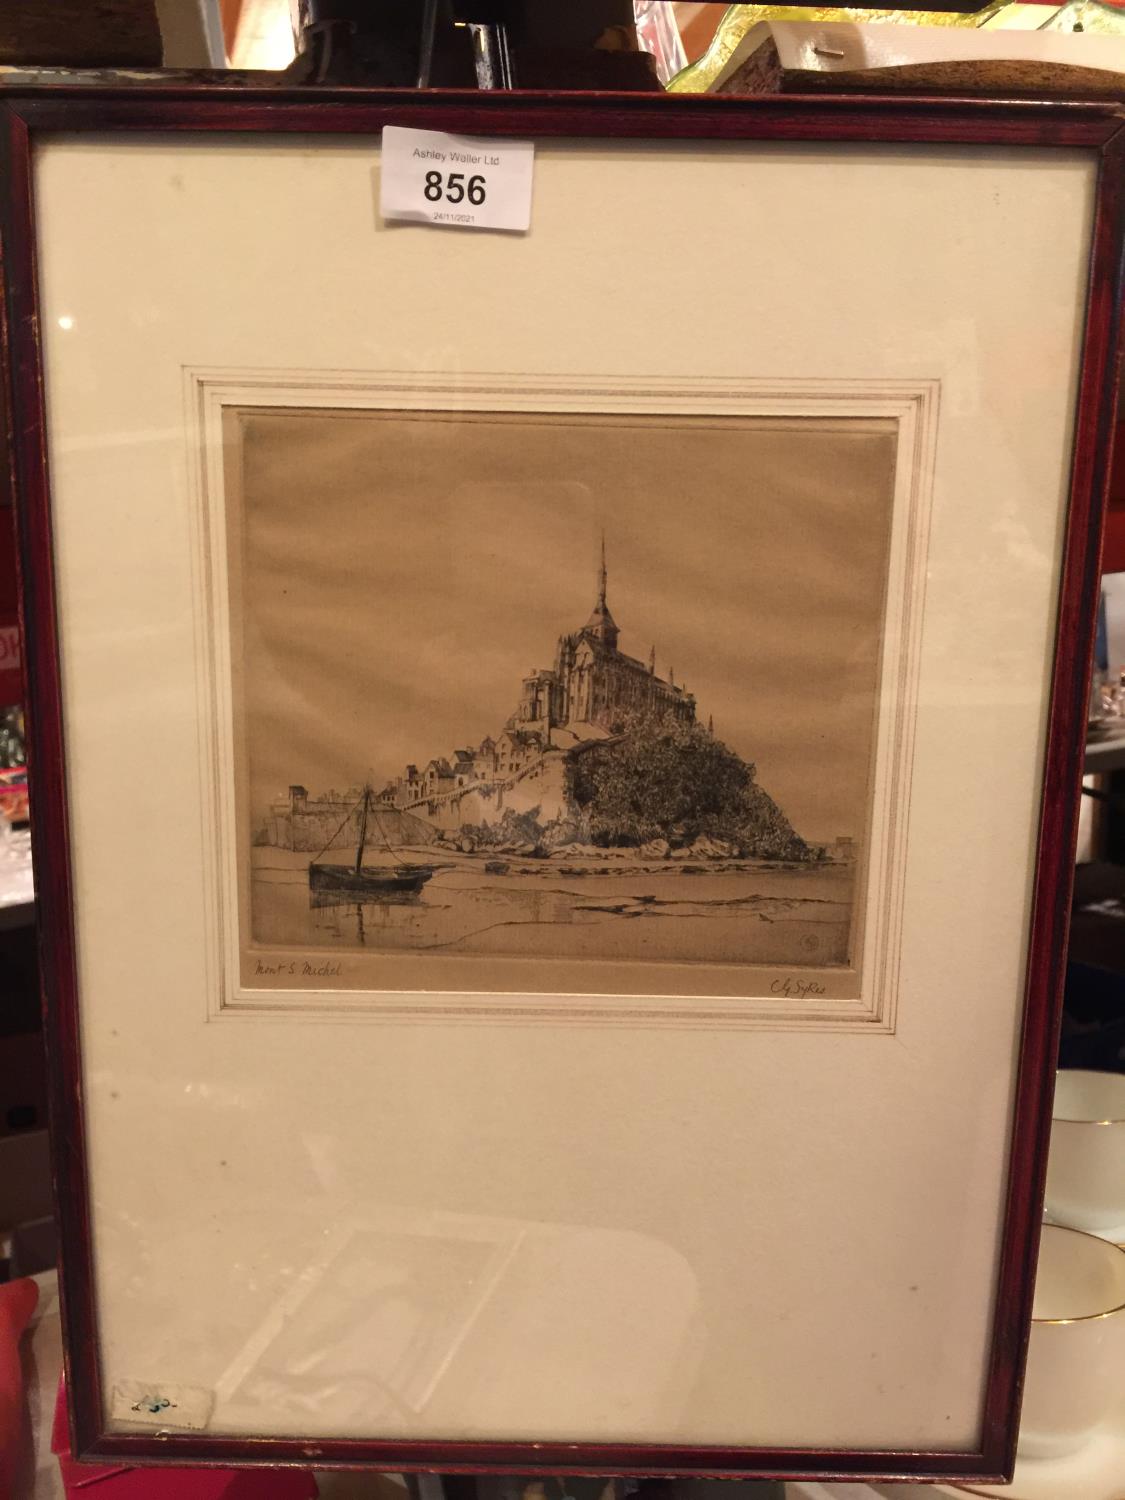 A SMALL FRAMED PAINTING ON BOARD OF A LARGE SHIP AND A SECOND FRAMED PRINT - Image 3 of 3